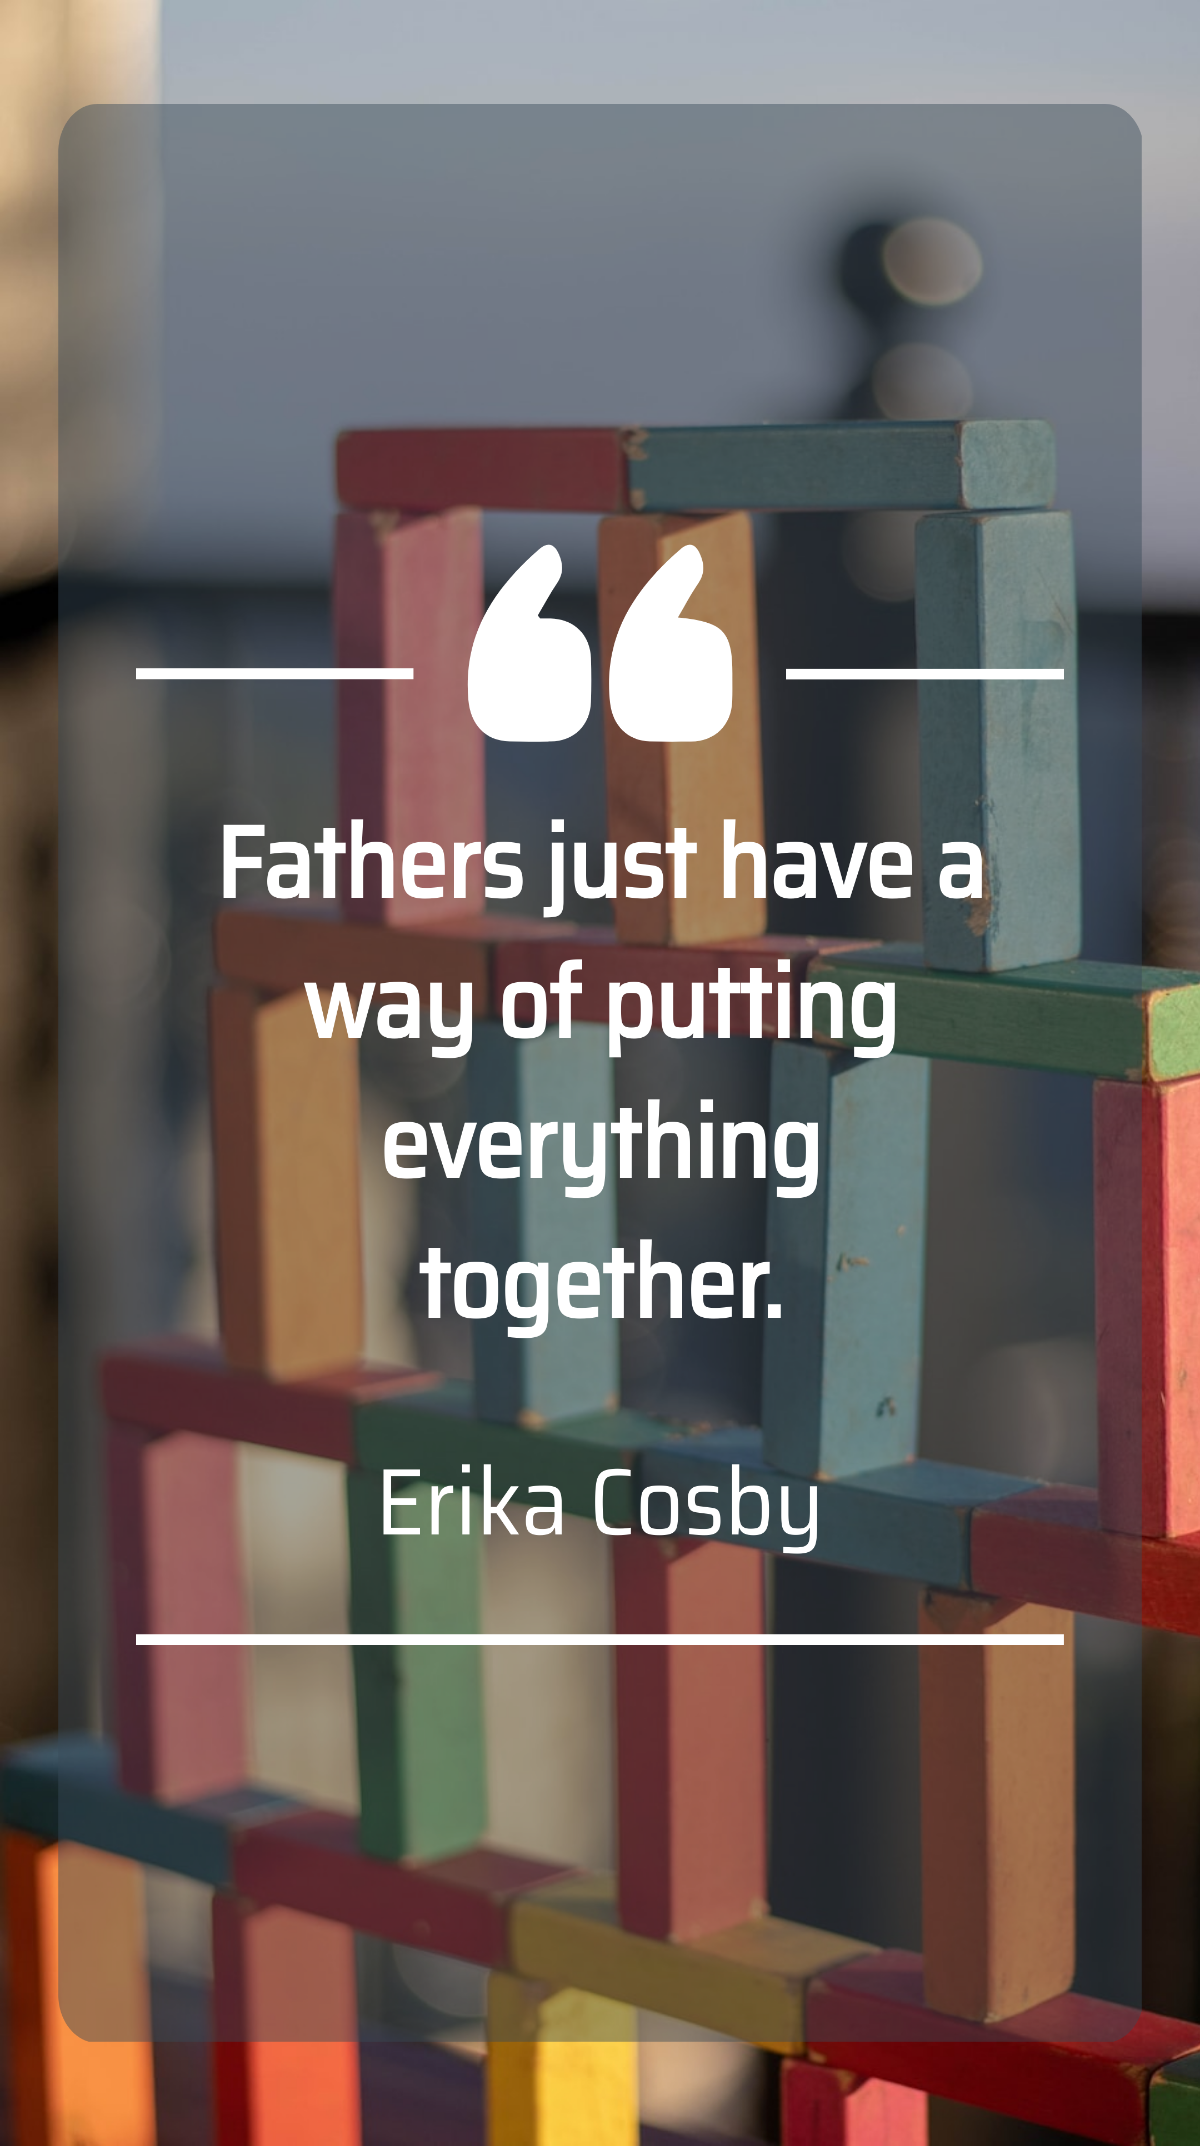 Erika Cosby - “Fathers just have a way of putting everything together.”  Template